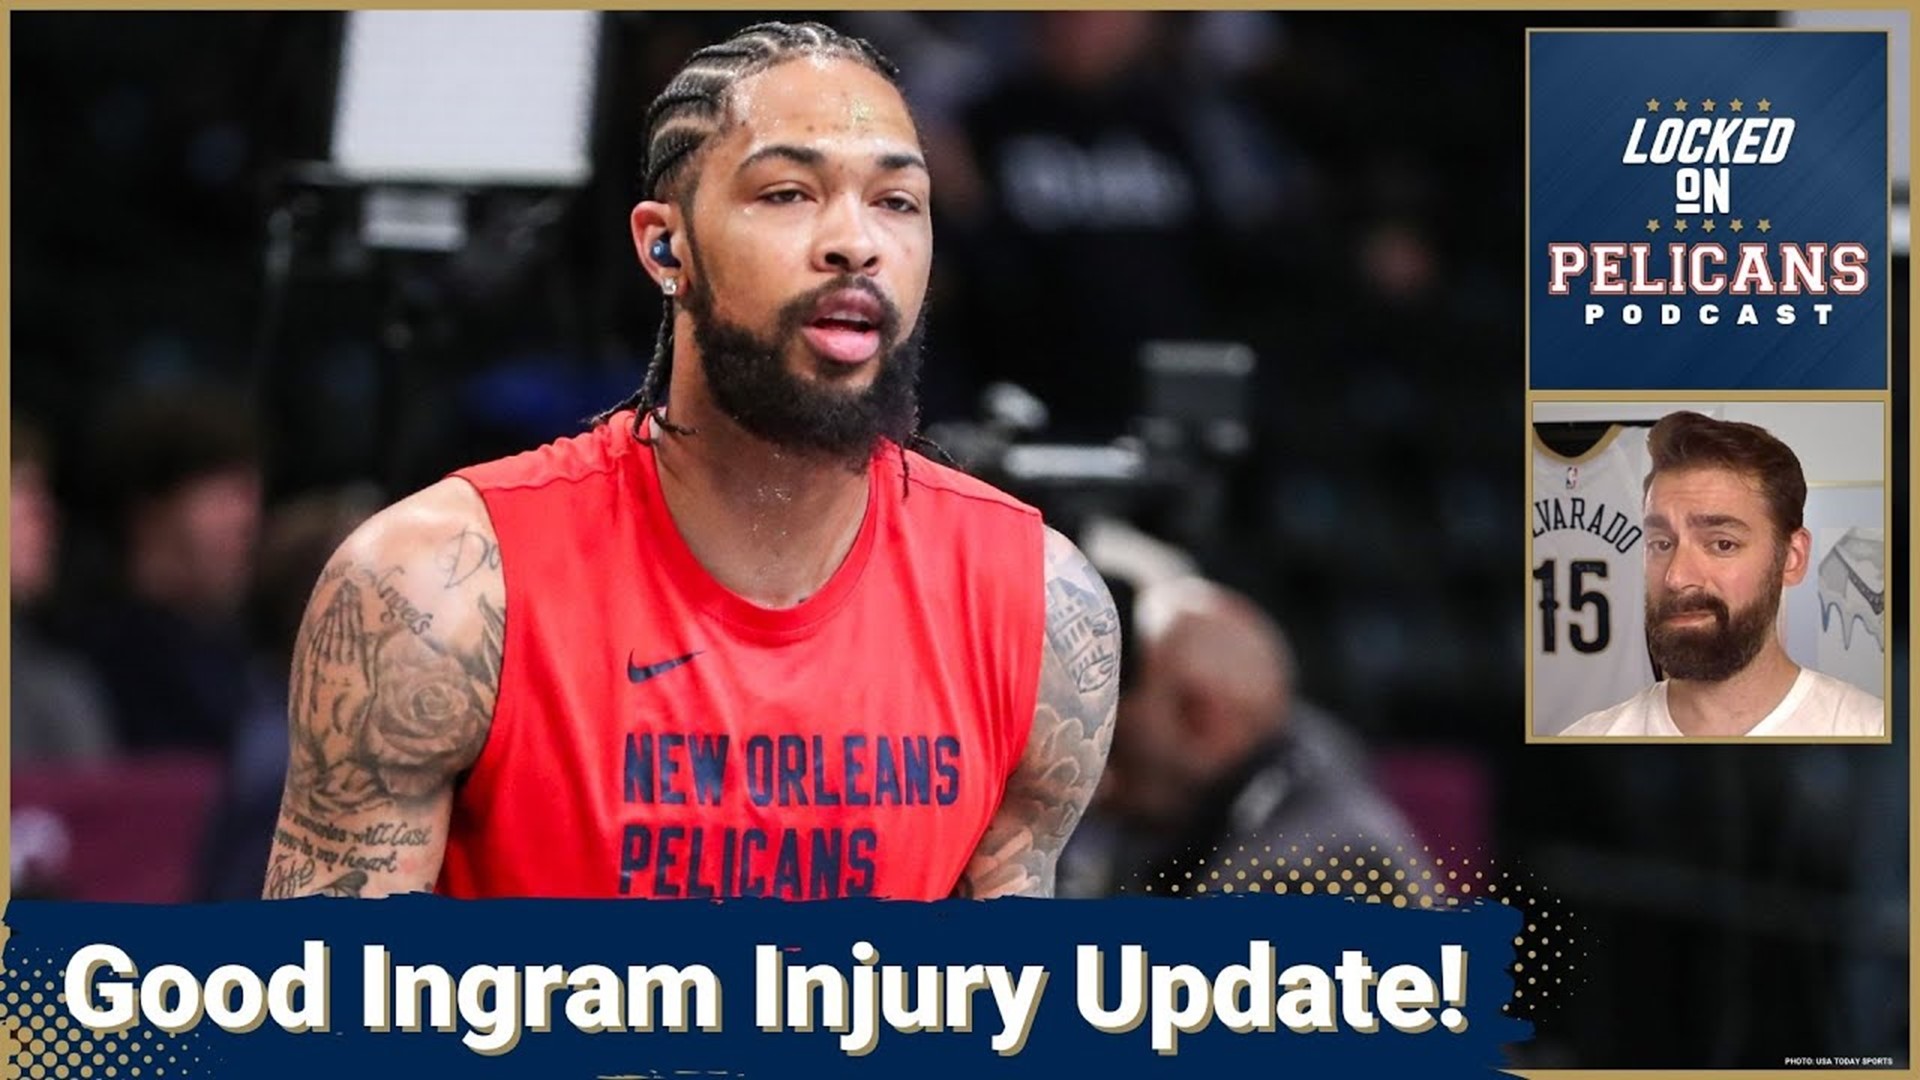 Good injury update! The New Orleans Pelicans have been missing Brandon Ingram for a few weeks now but he's making positive steps in his recovery